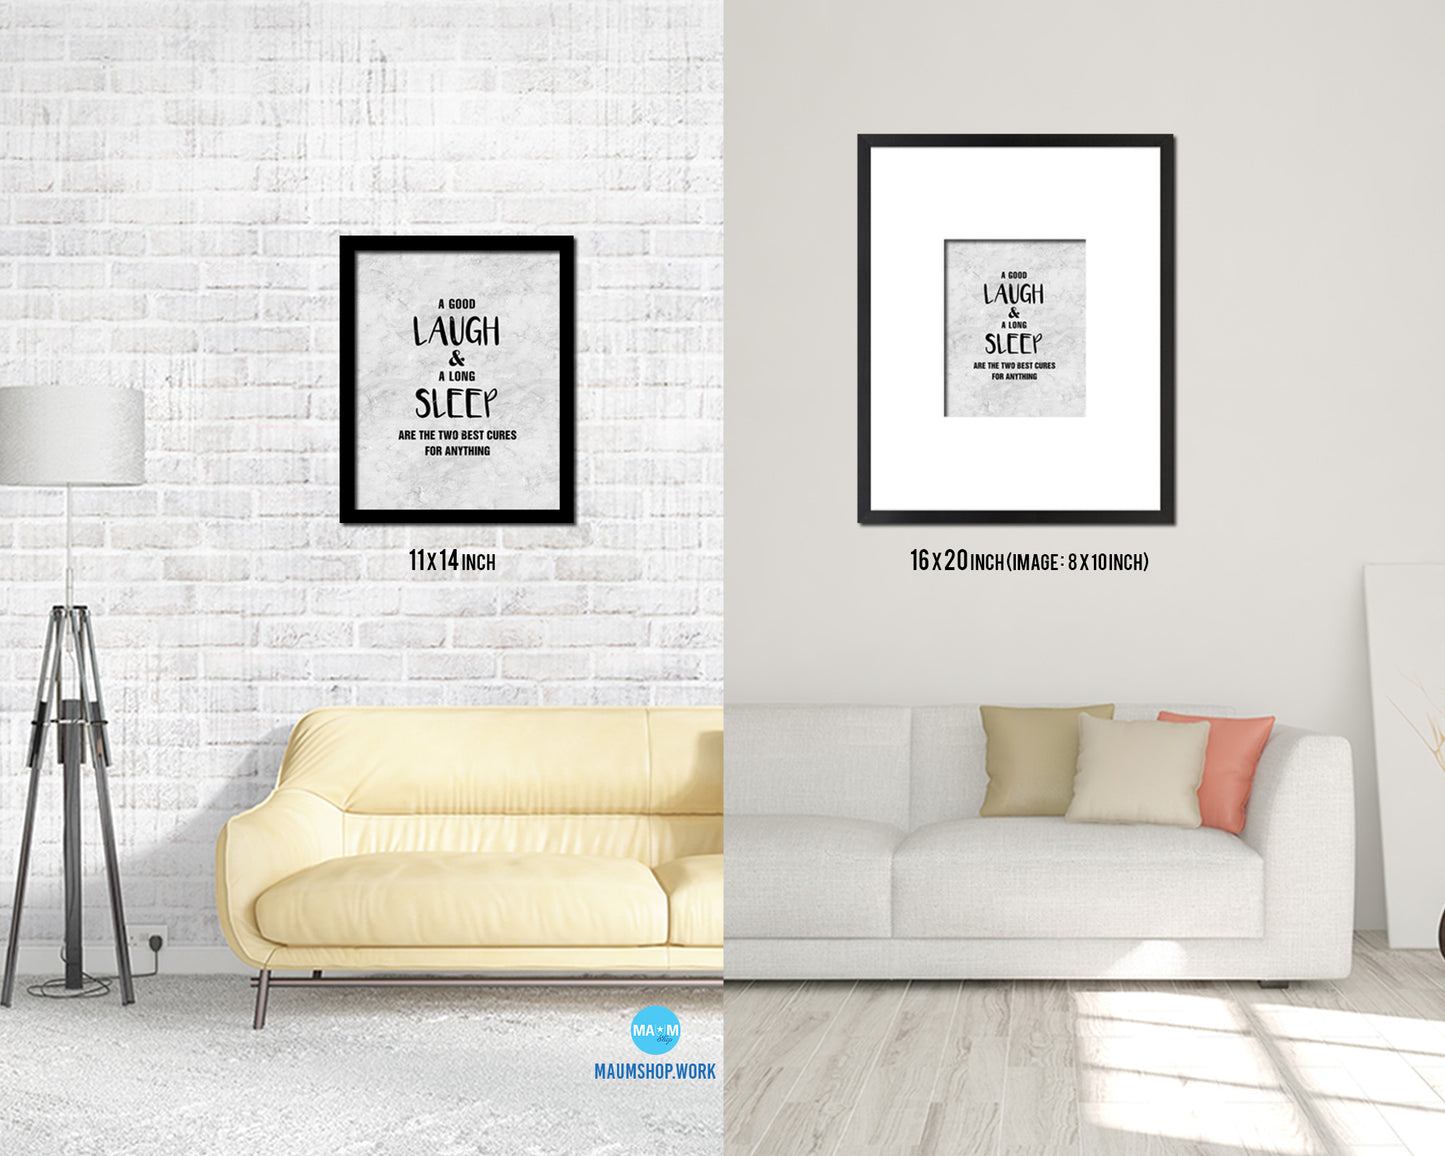 A good laugh & a long sleep are the two best cures Quote Framed Print Wall Art Decor Gifts